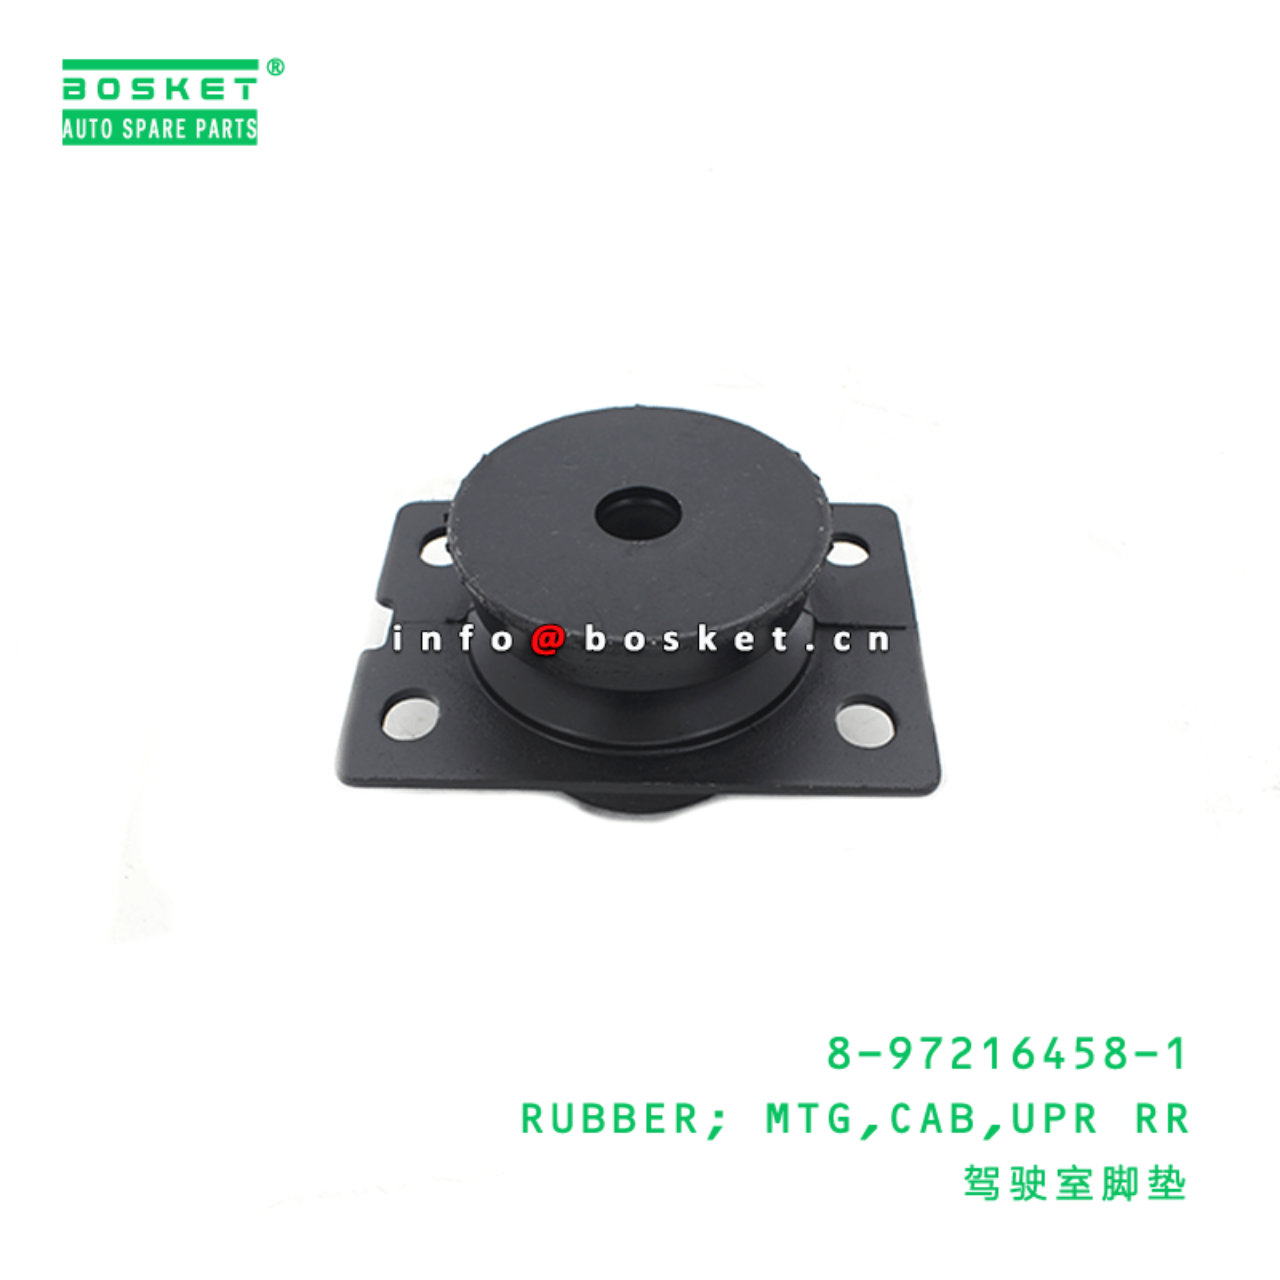 8-97216458-1 Upper Rear Mounting Rubber 8972164581 Suitable for ISUZU NKR 